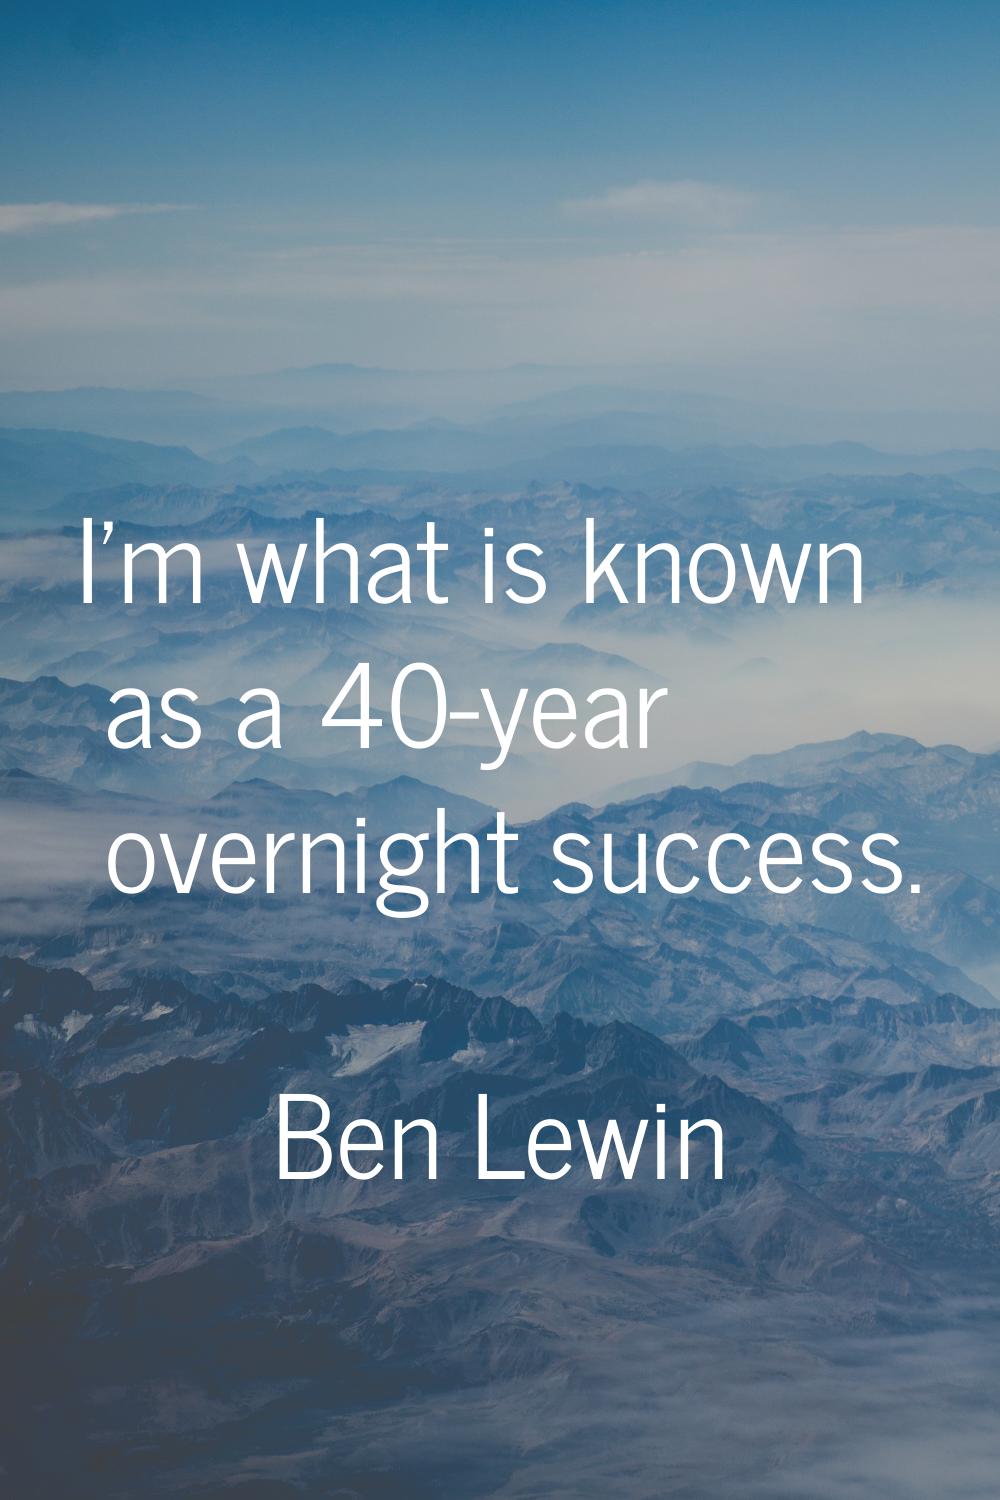 I'm what is known as a 40-year overnight success.